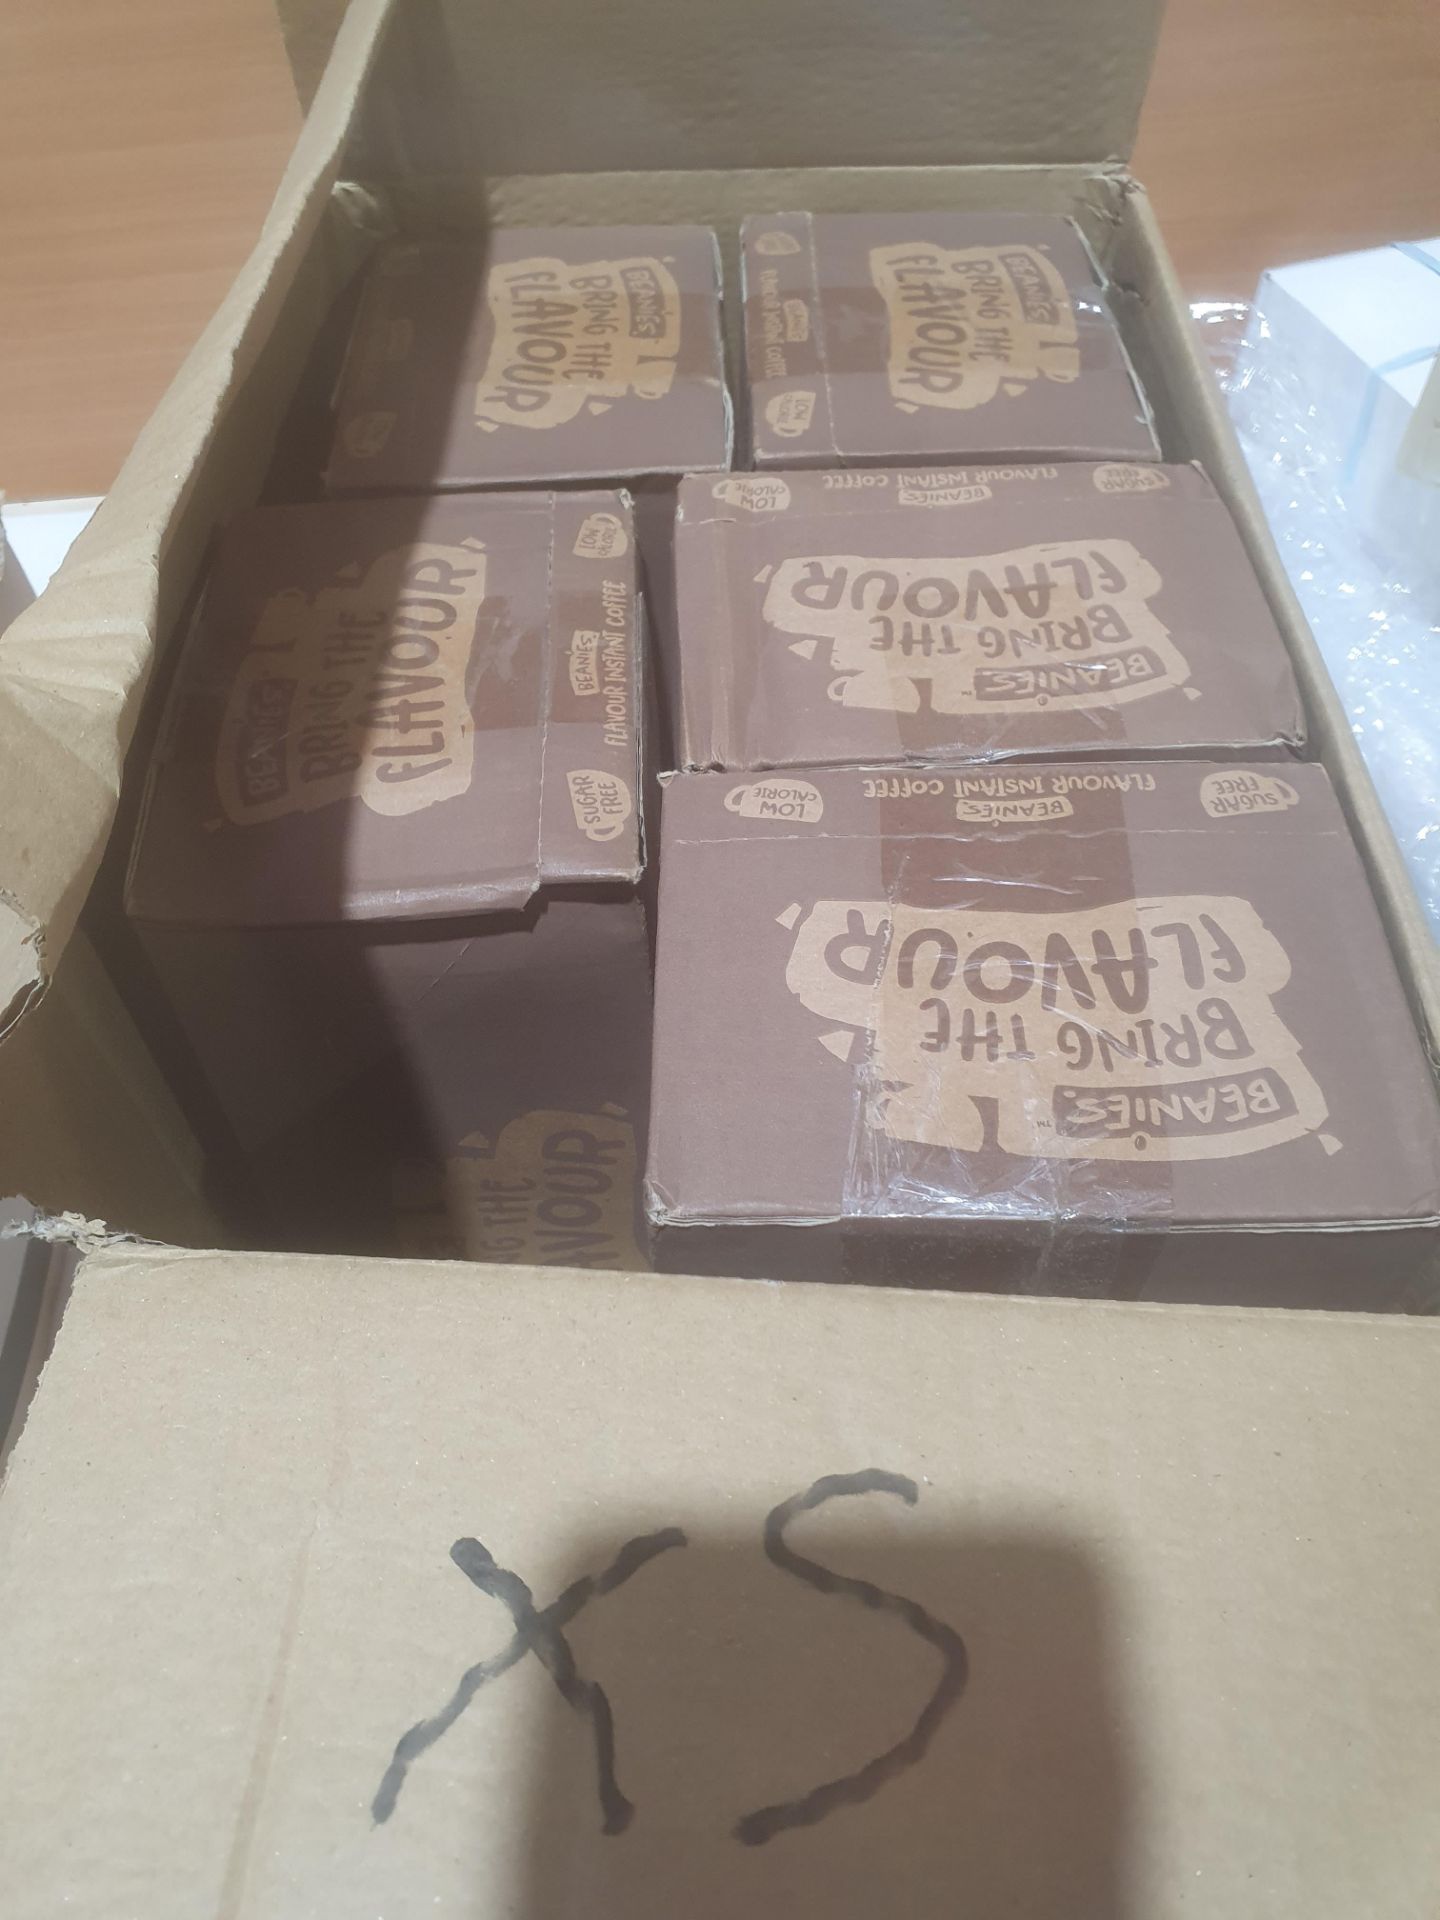 X 5 BOXES OF BEANIES INSTANT COFFEE CARAMEL FLAVOUR X 8 LITTLE JARS IN EACH BOXCondition